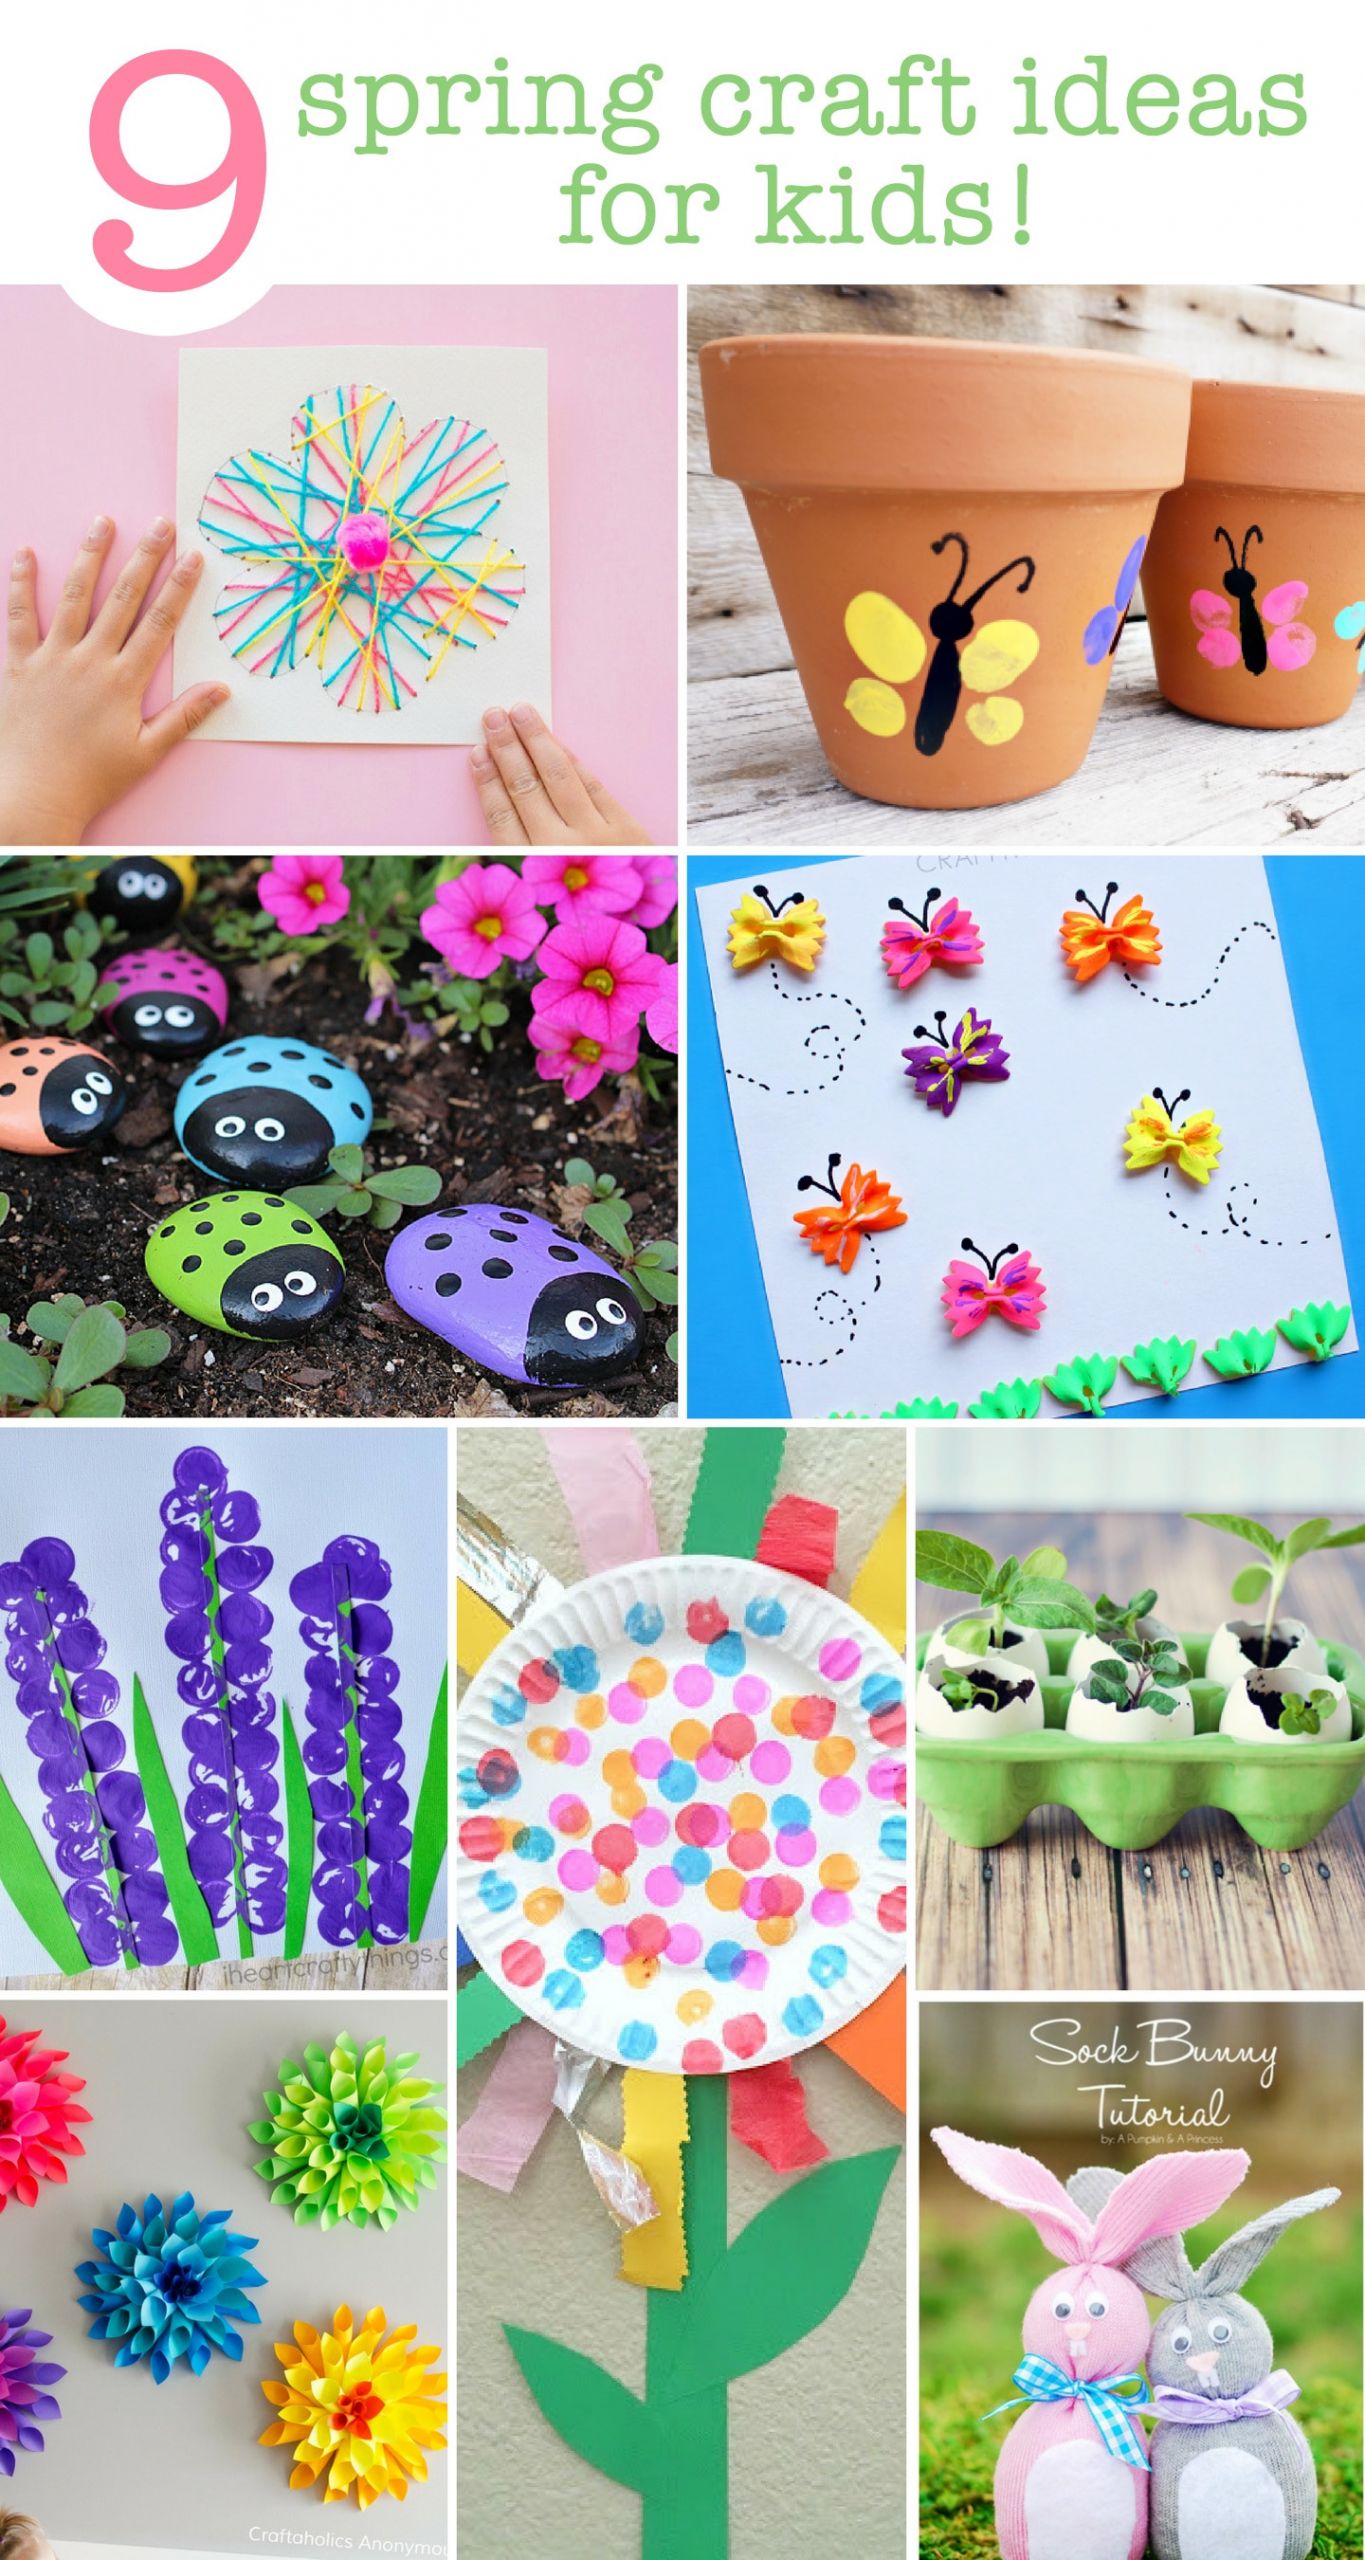 Craft Ideas For Toddlers
 9 Spring Craft Ideas For The Kids